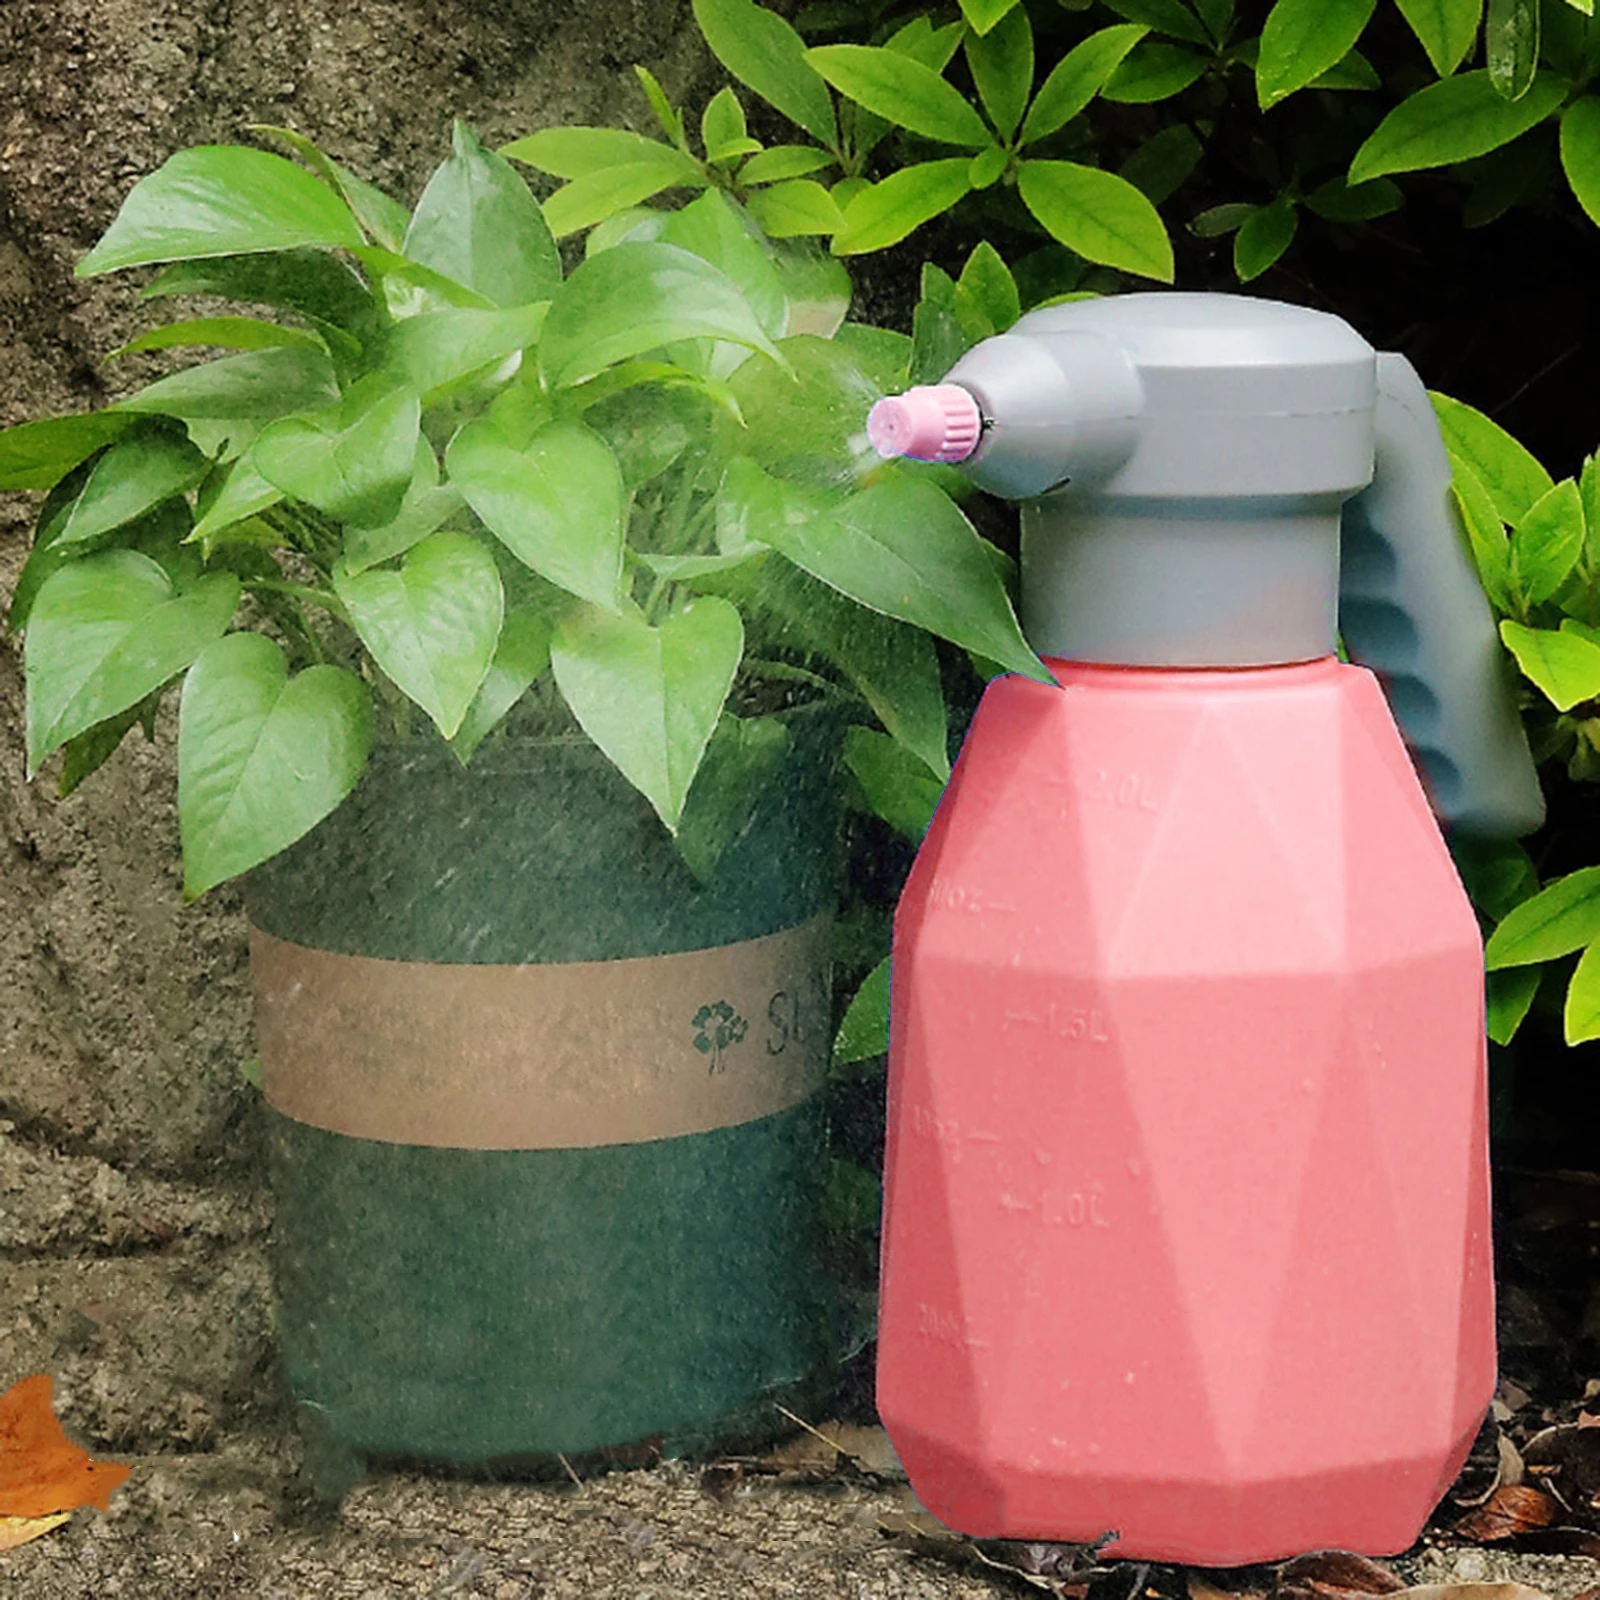 USB Rechrageable Electric Spray Bottle Handheld Automatic Watering Can Plant Mister Sprayer with Adjustable Nozzle 2L